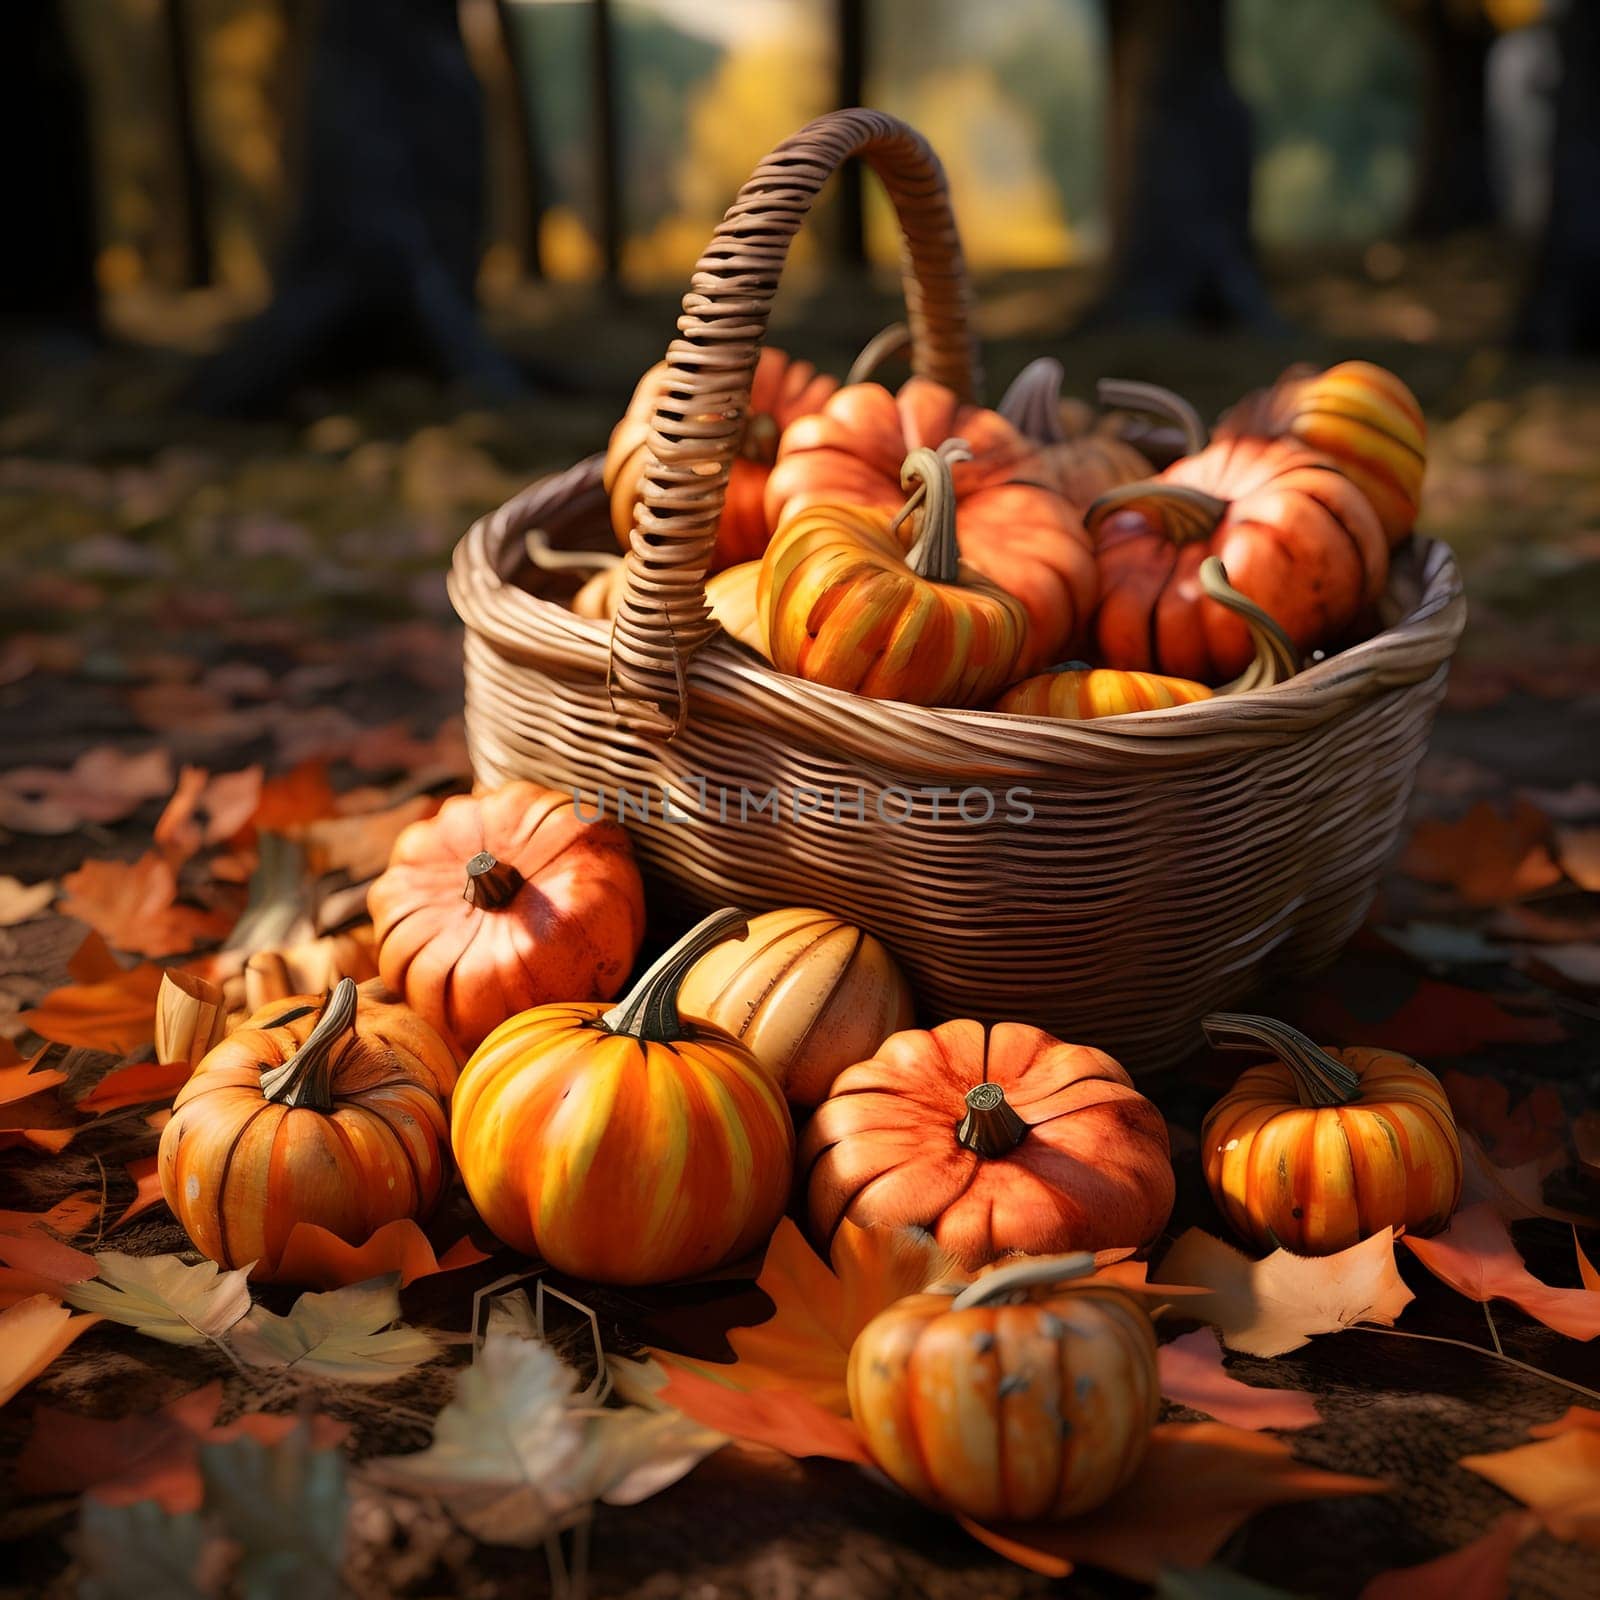 Wicker basket full of colorful small pumpkins in the forest around the leaves. Pumpkin as a dish of thanksgiving for the harvest. The atmosphere of joy and celebration.